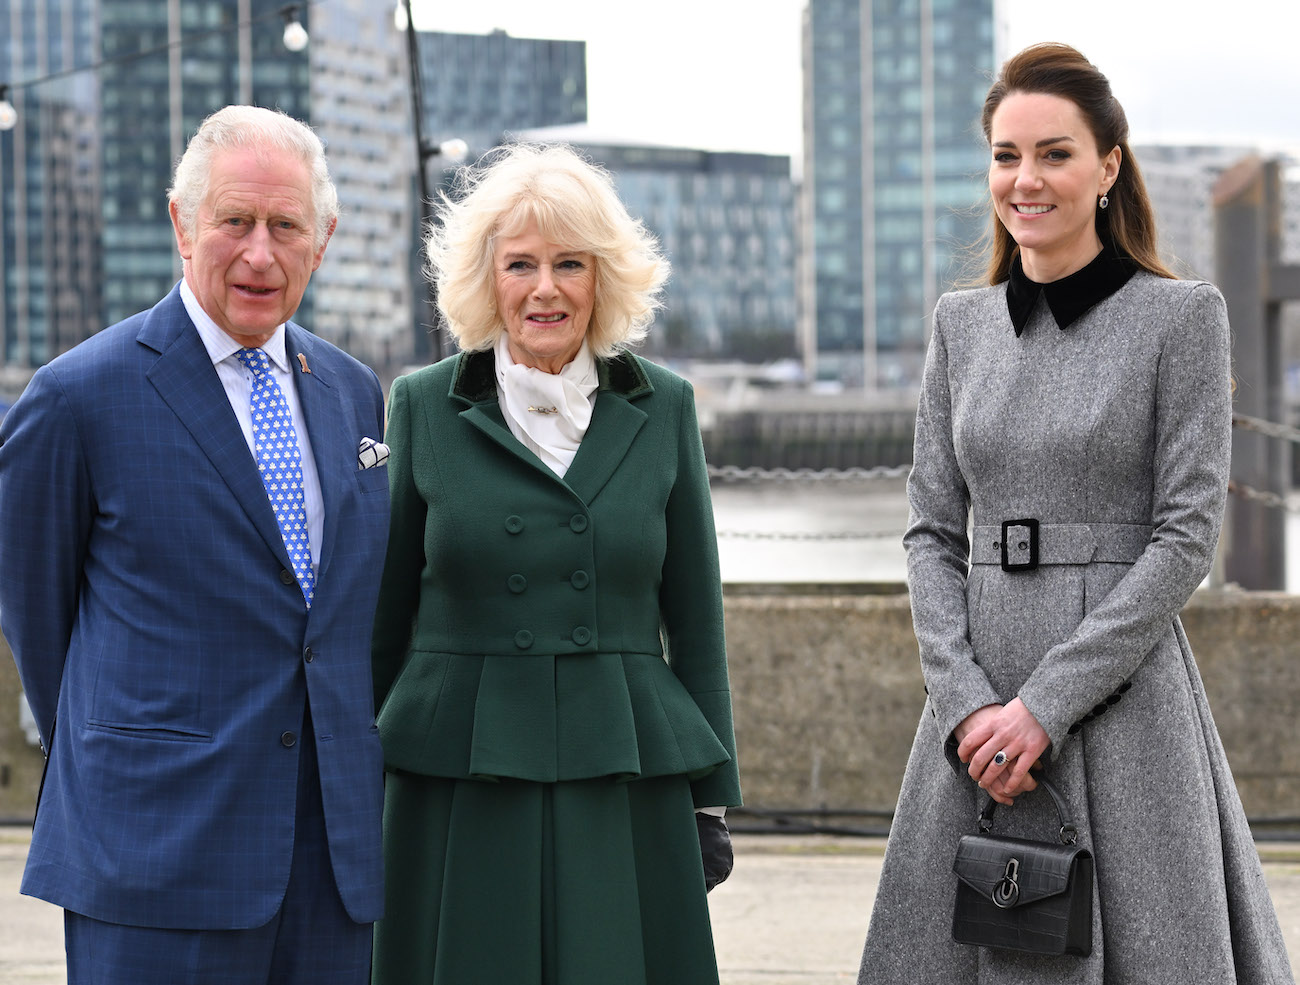 Prince Charles, Camilla Parker Bowles, and Kate Middleton looking on in front of a skyline